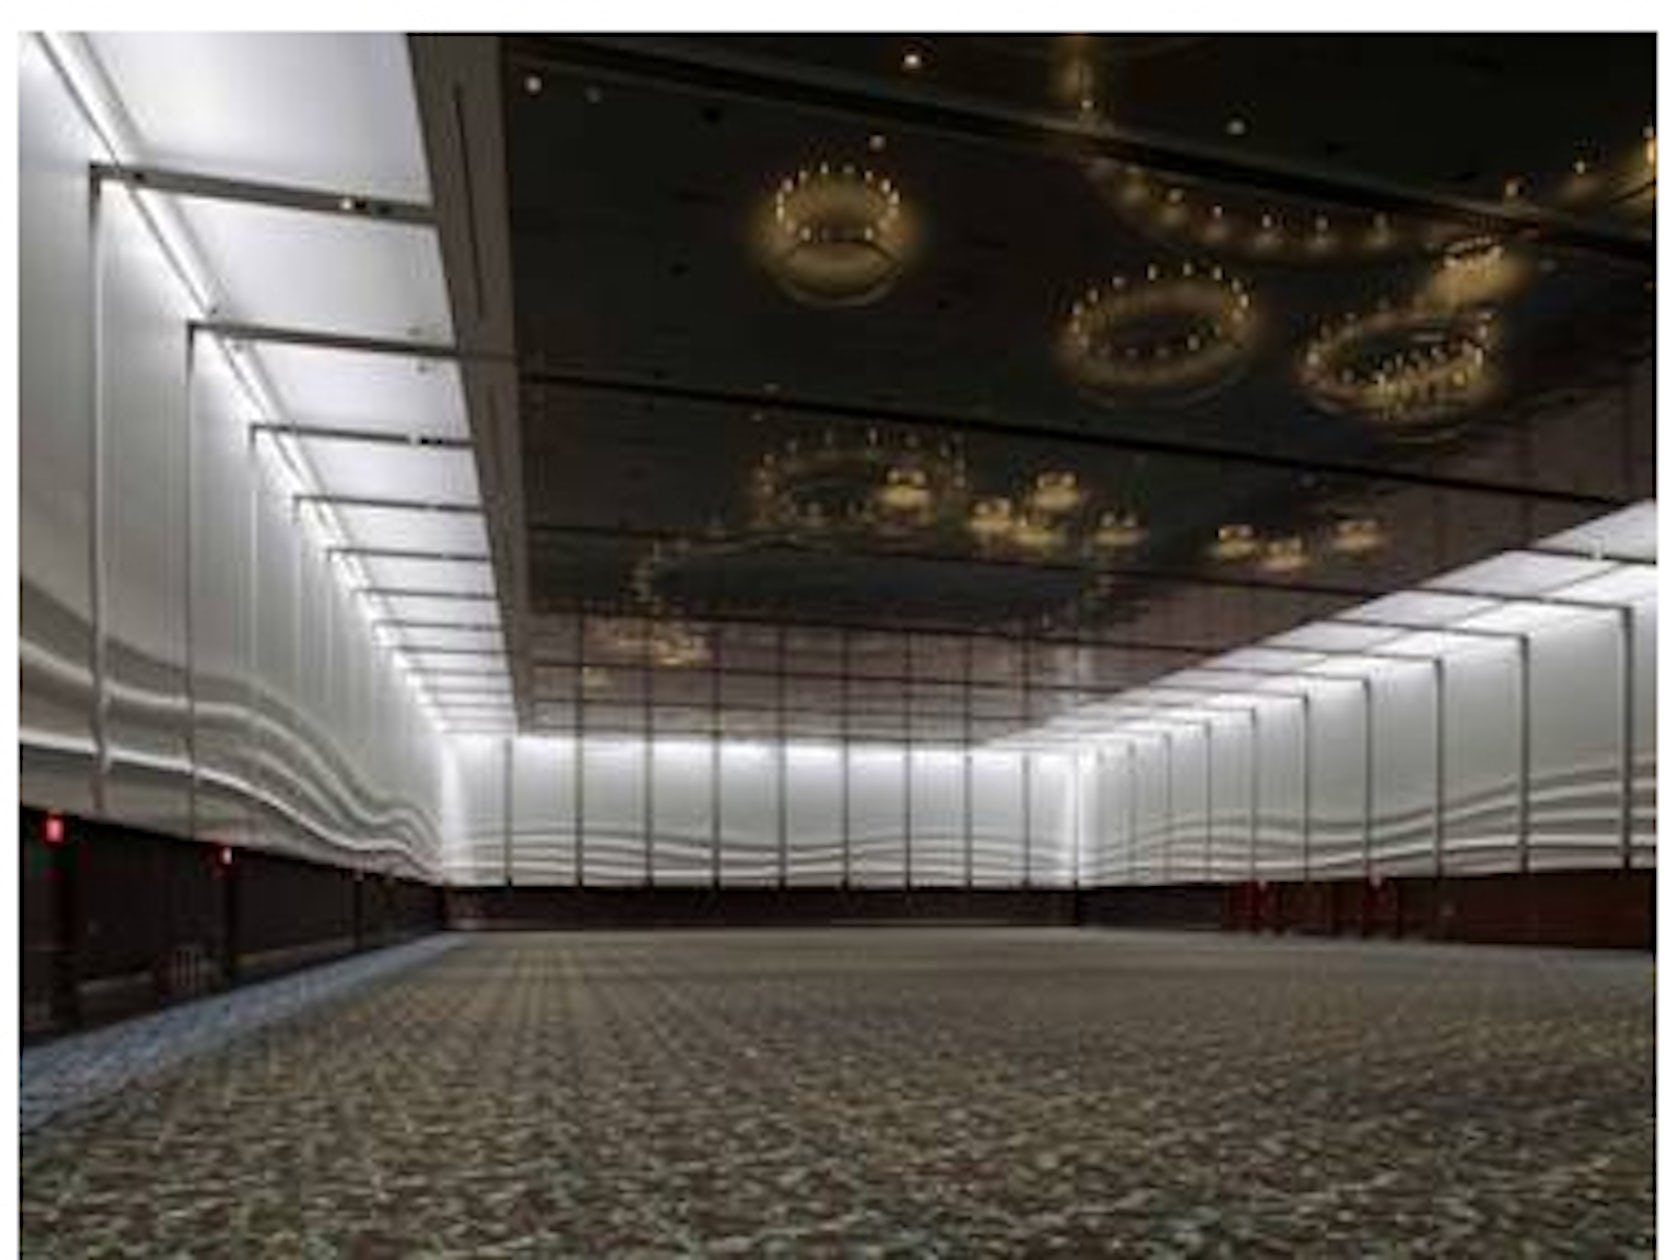 Bartle Hall Convention Center Ballroom Expansion by HNTB Architecture